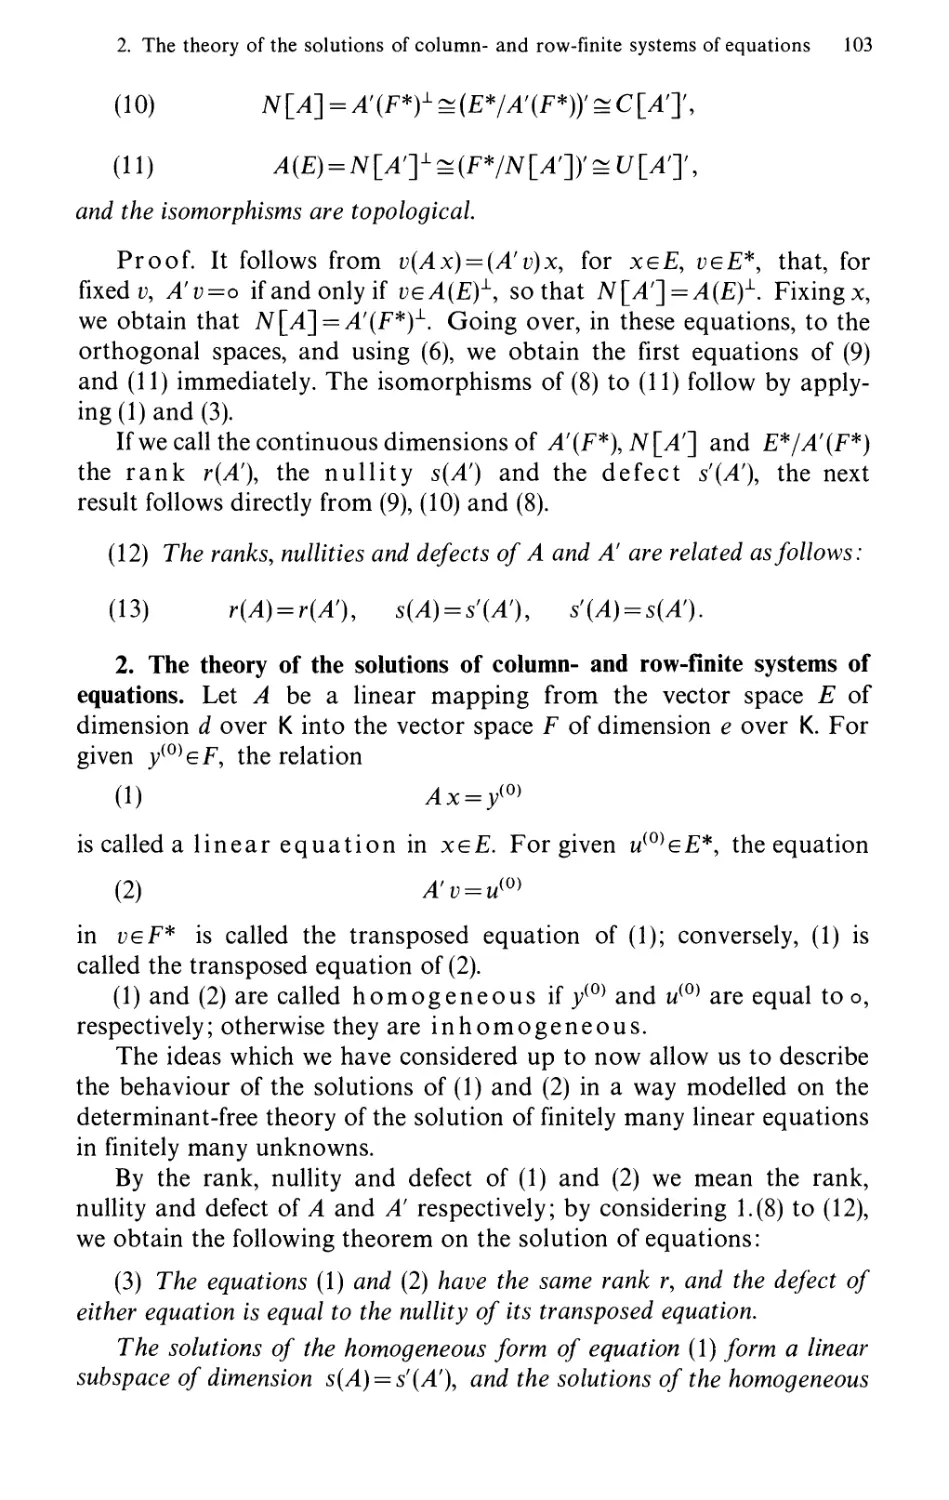 2. The theory of the solutions of column- and row-finite systems of equations